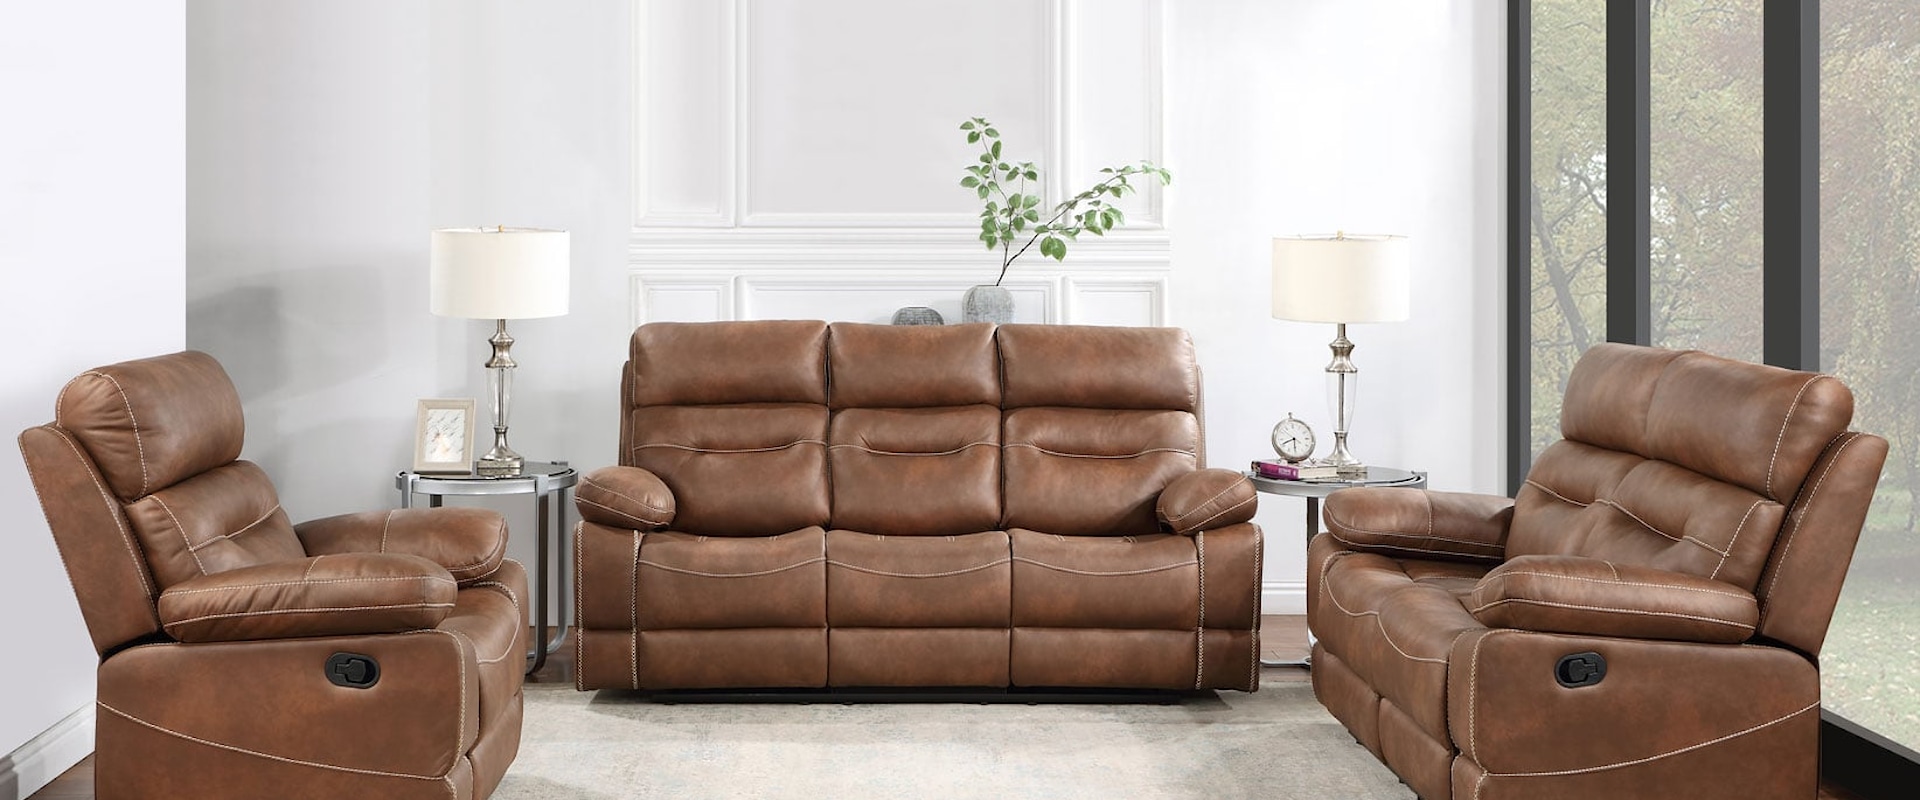 Casual 3-Piece Living Room Set with Pillow Arms